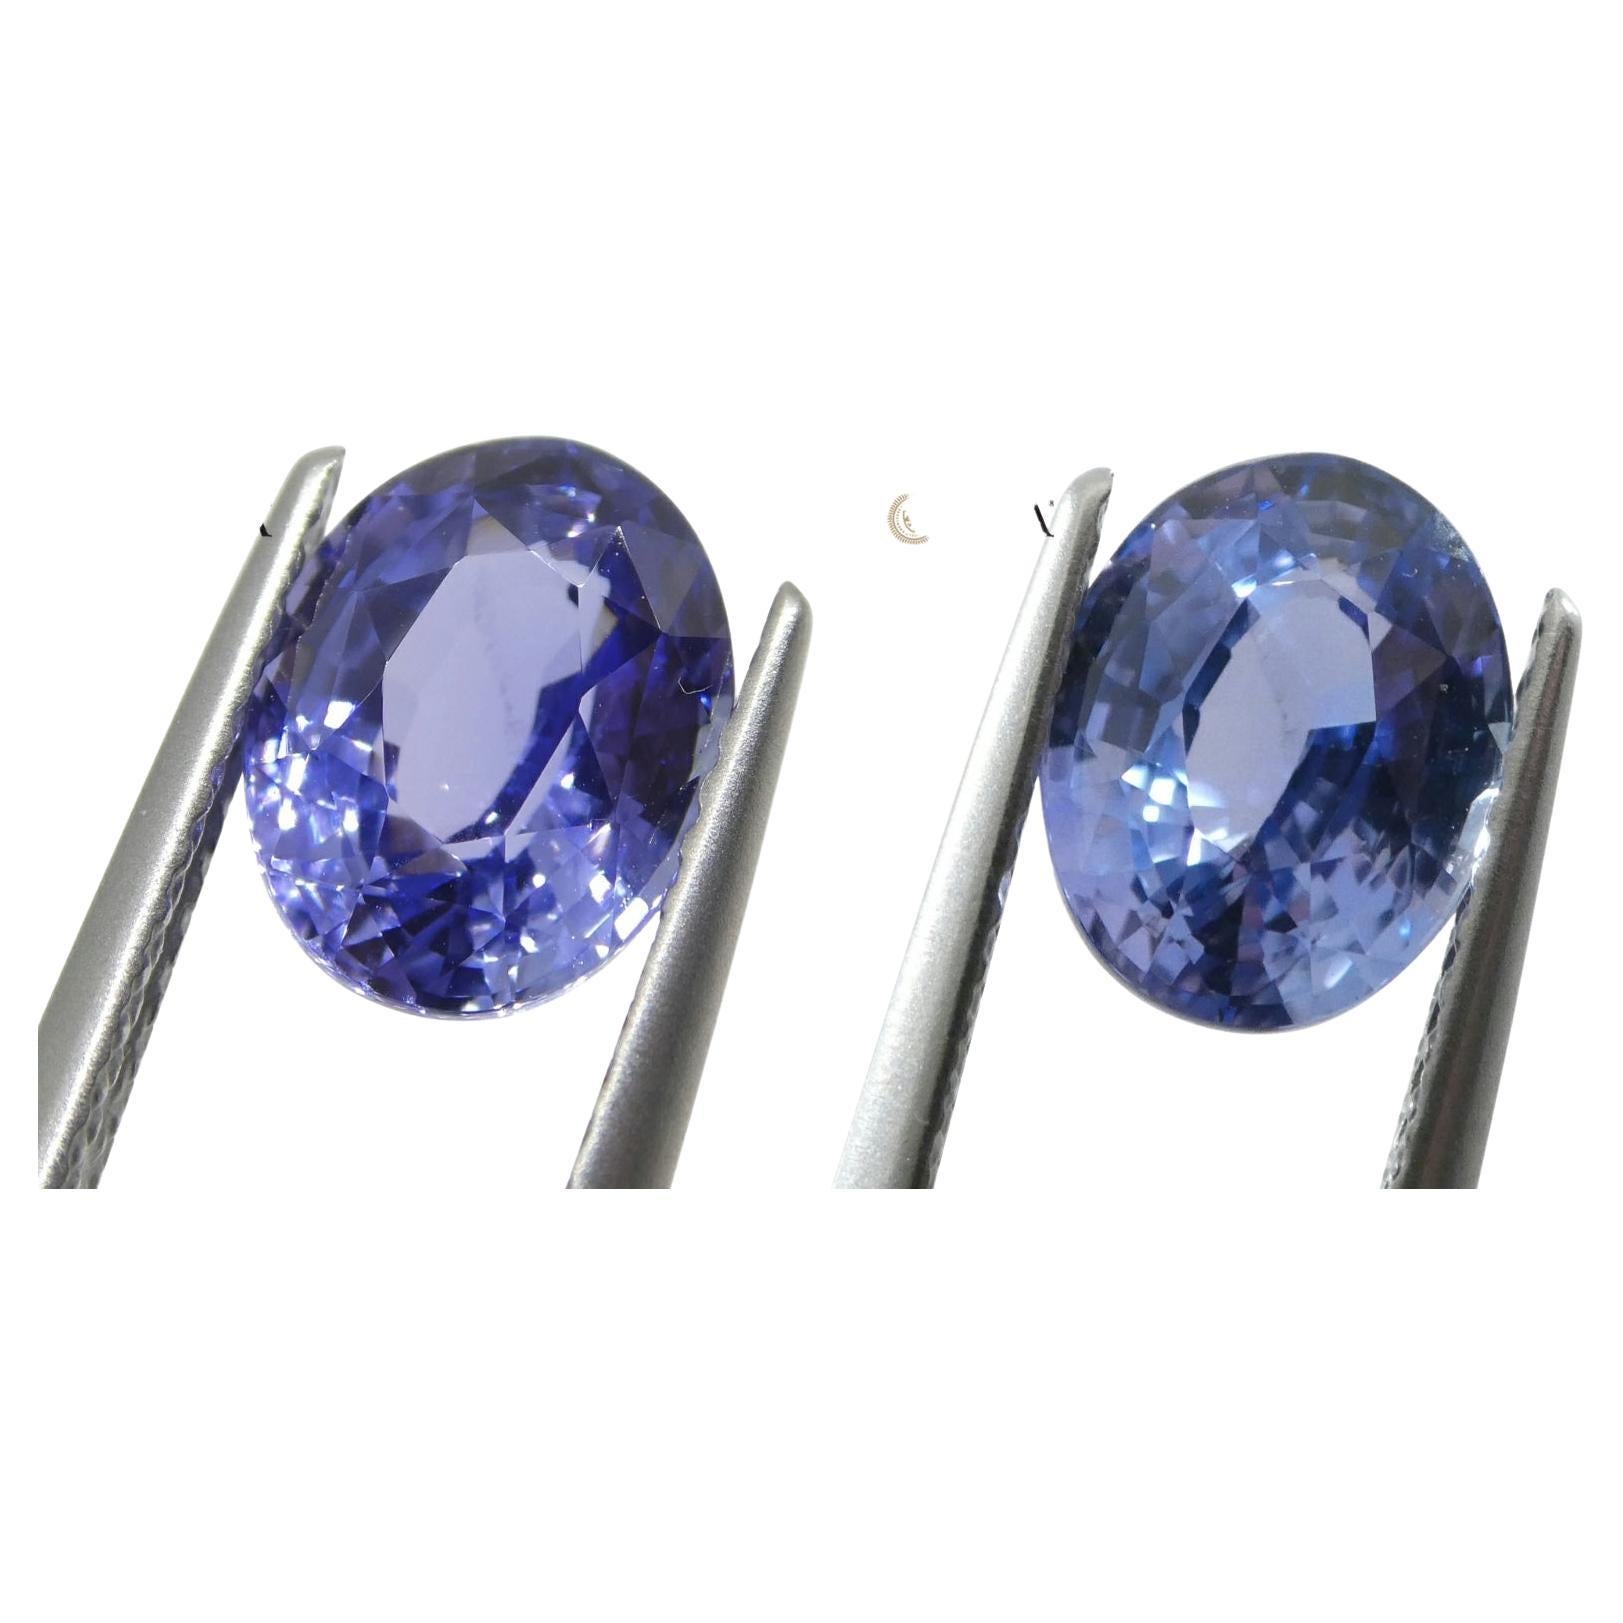 2.50ct Oval Color Change Sapphire GIA Certified Unheated Sri Lanka, Violetish Bl For Sale